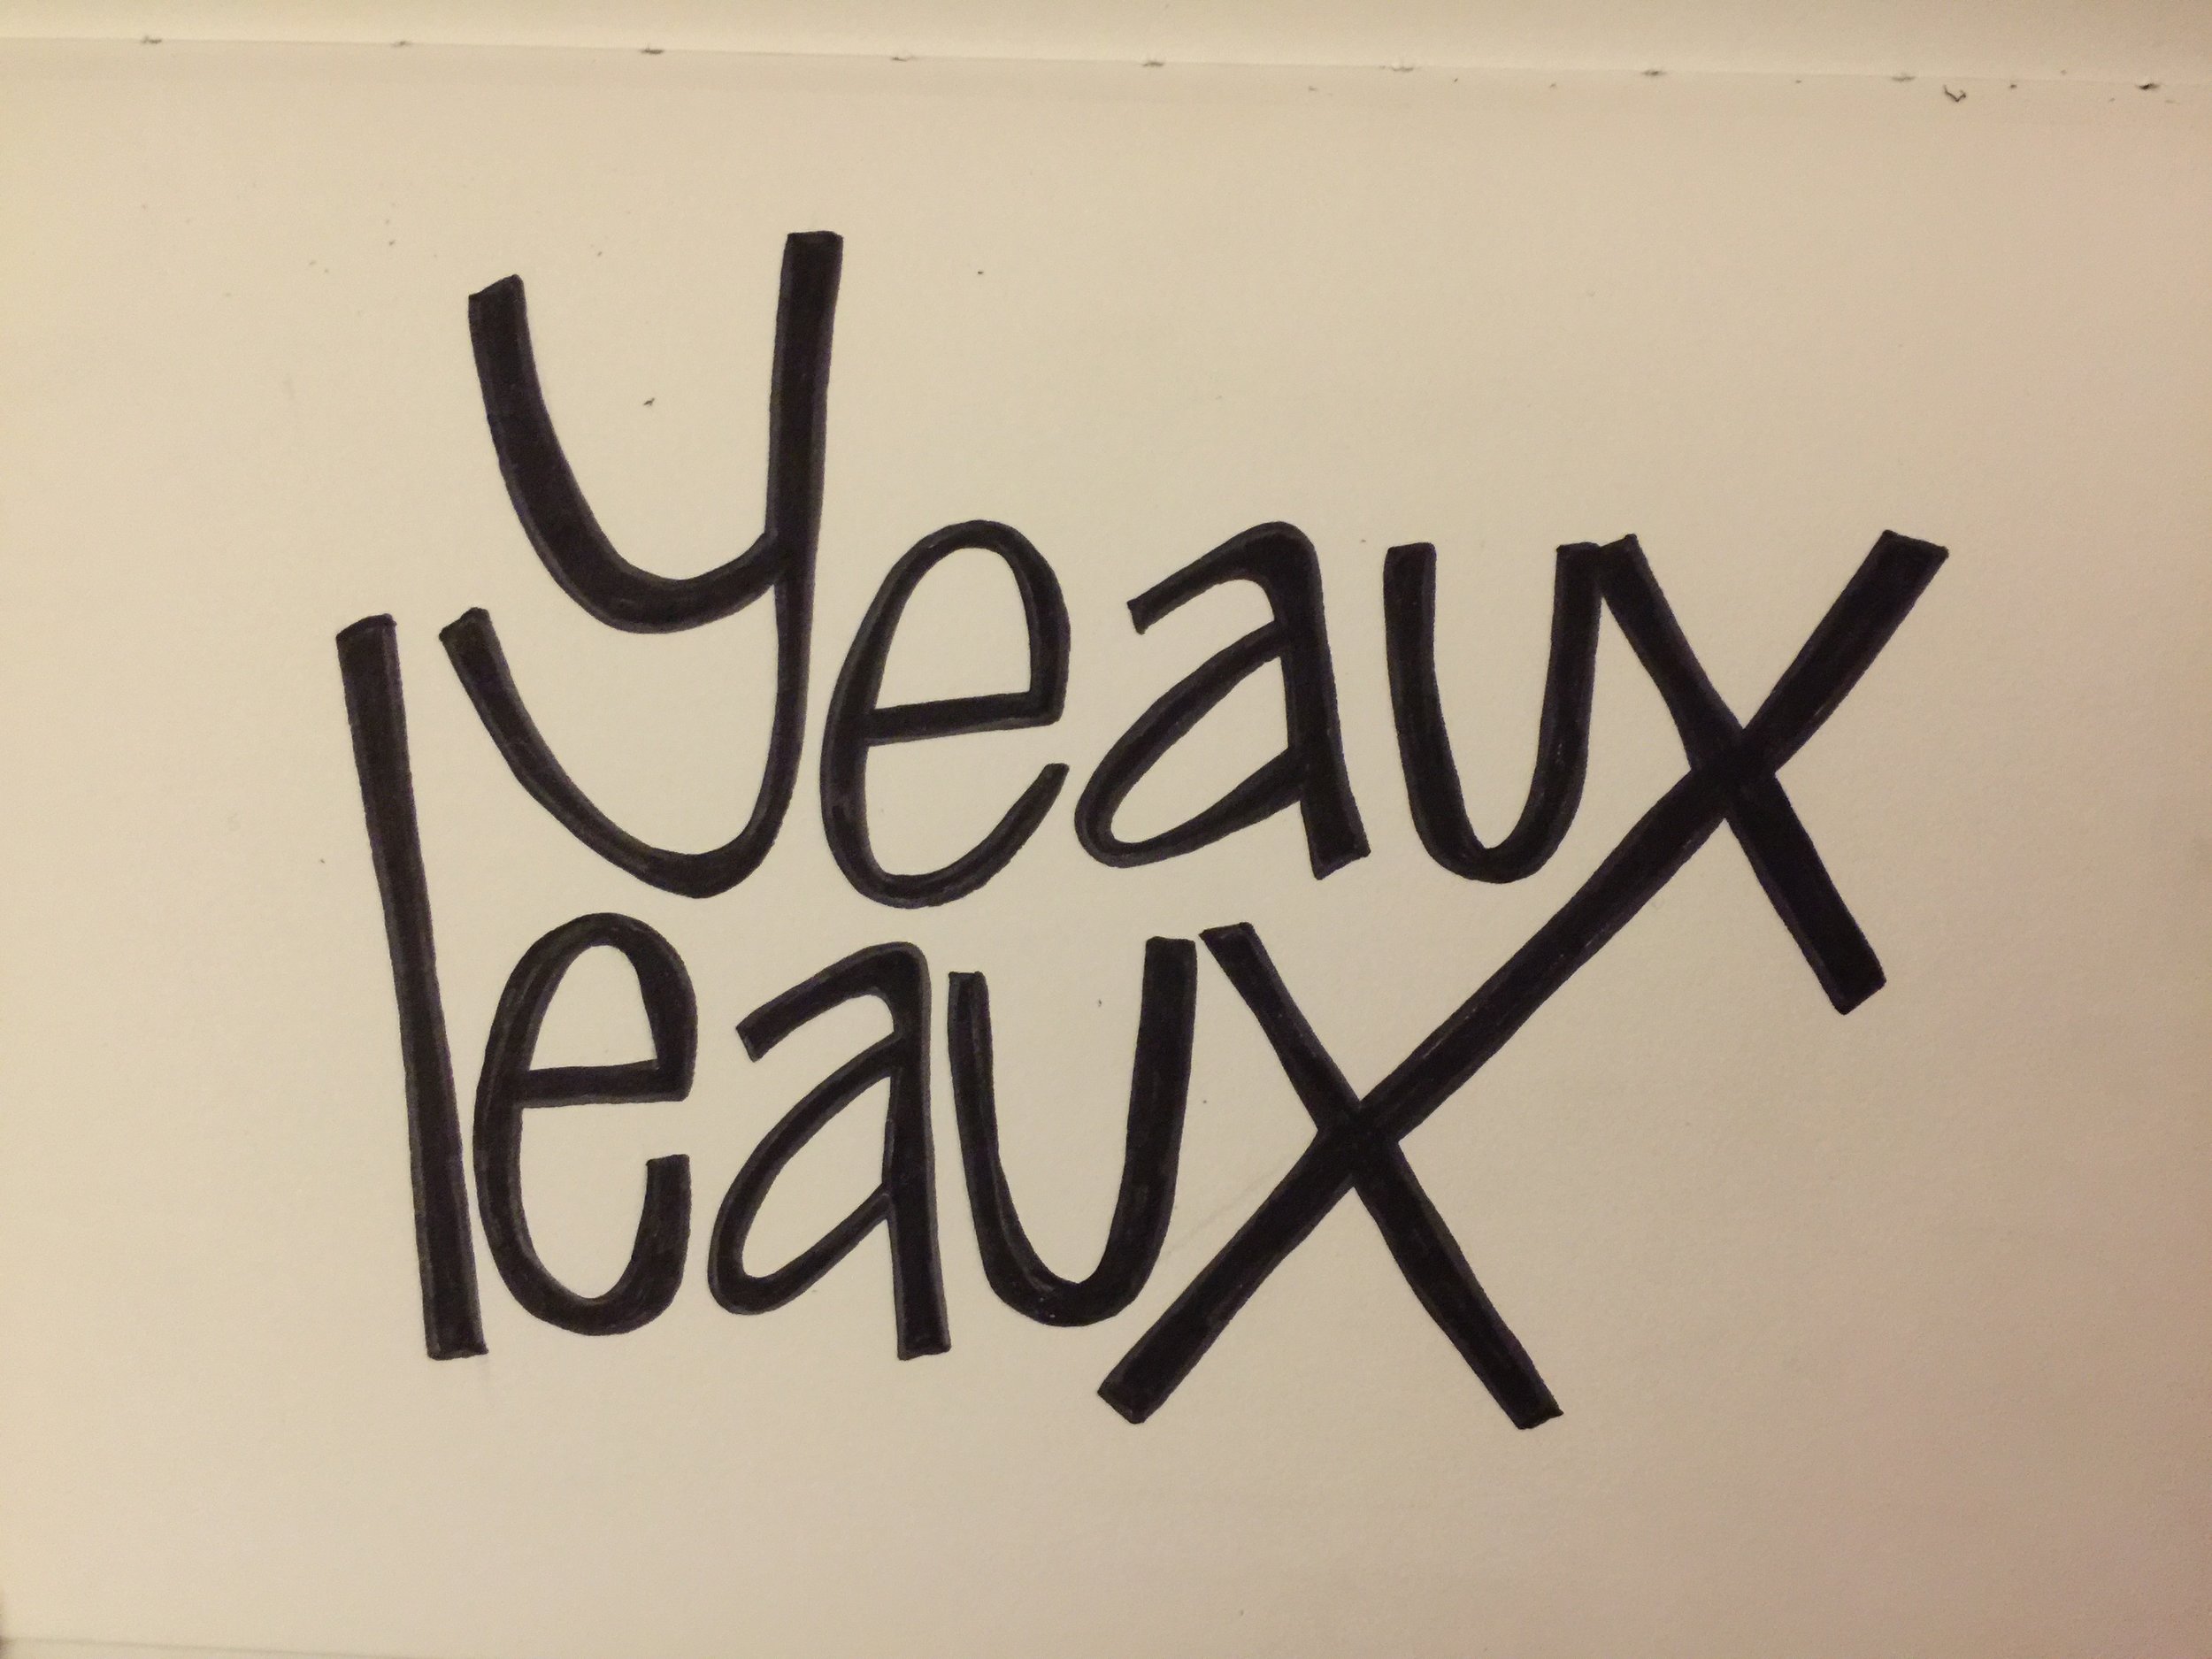 hand lettering by emily reeves dean that says yeaux leaux